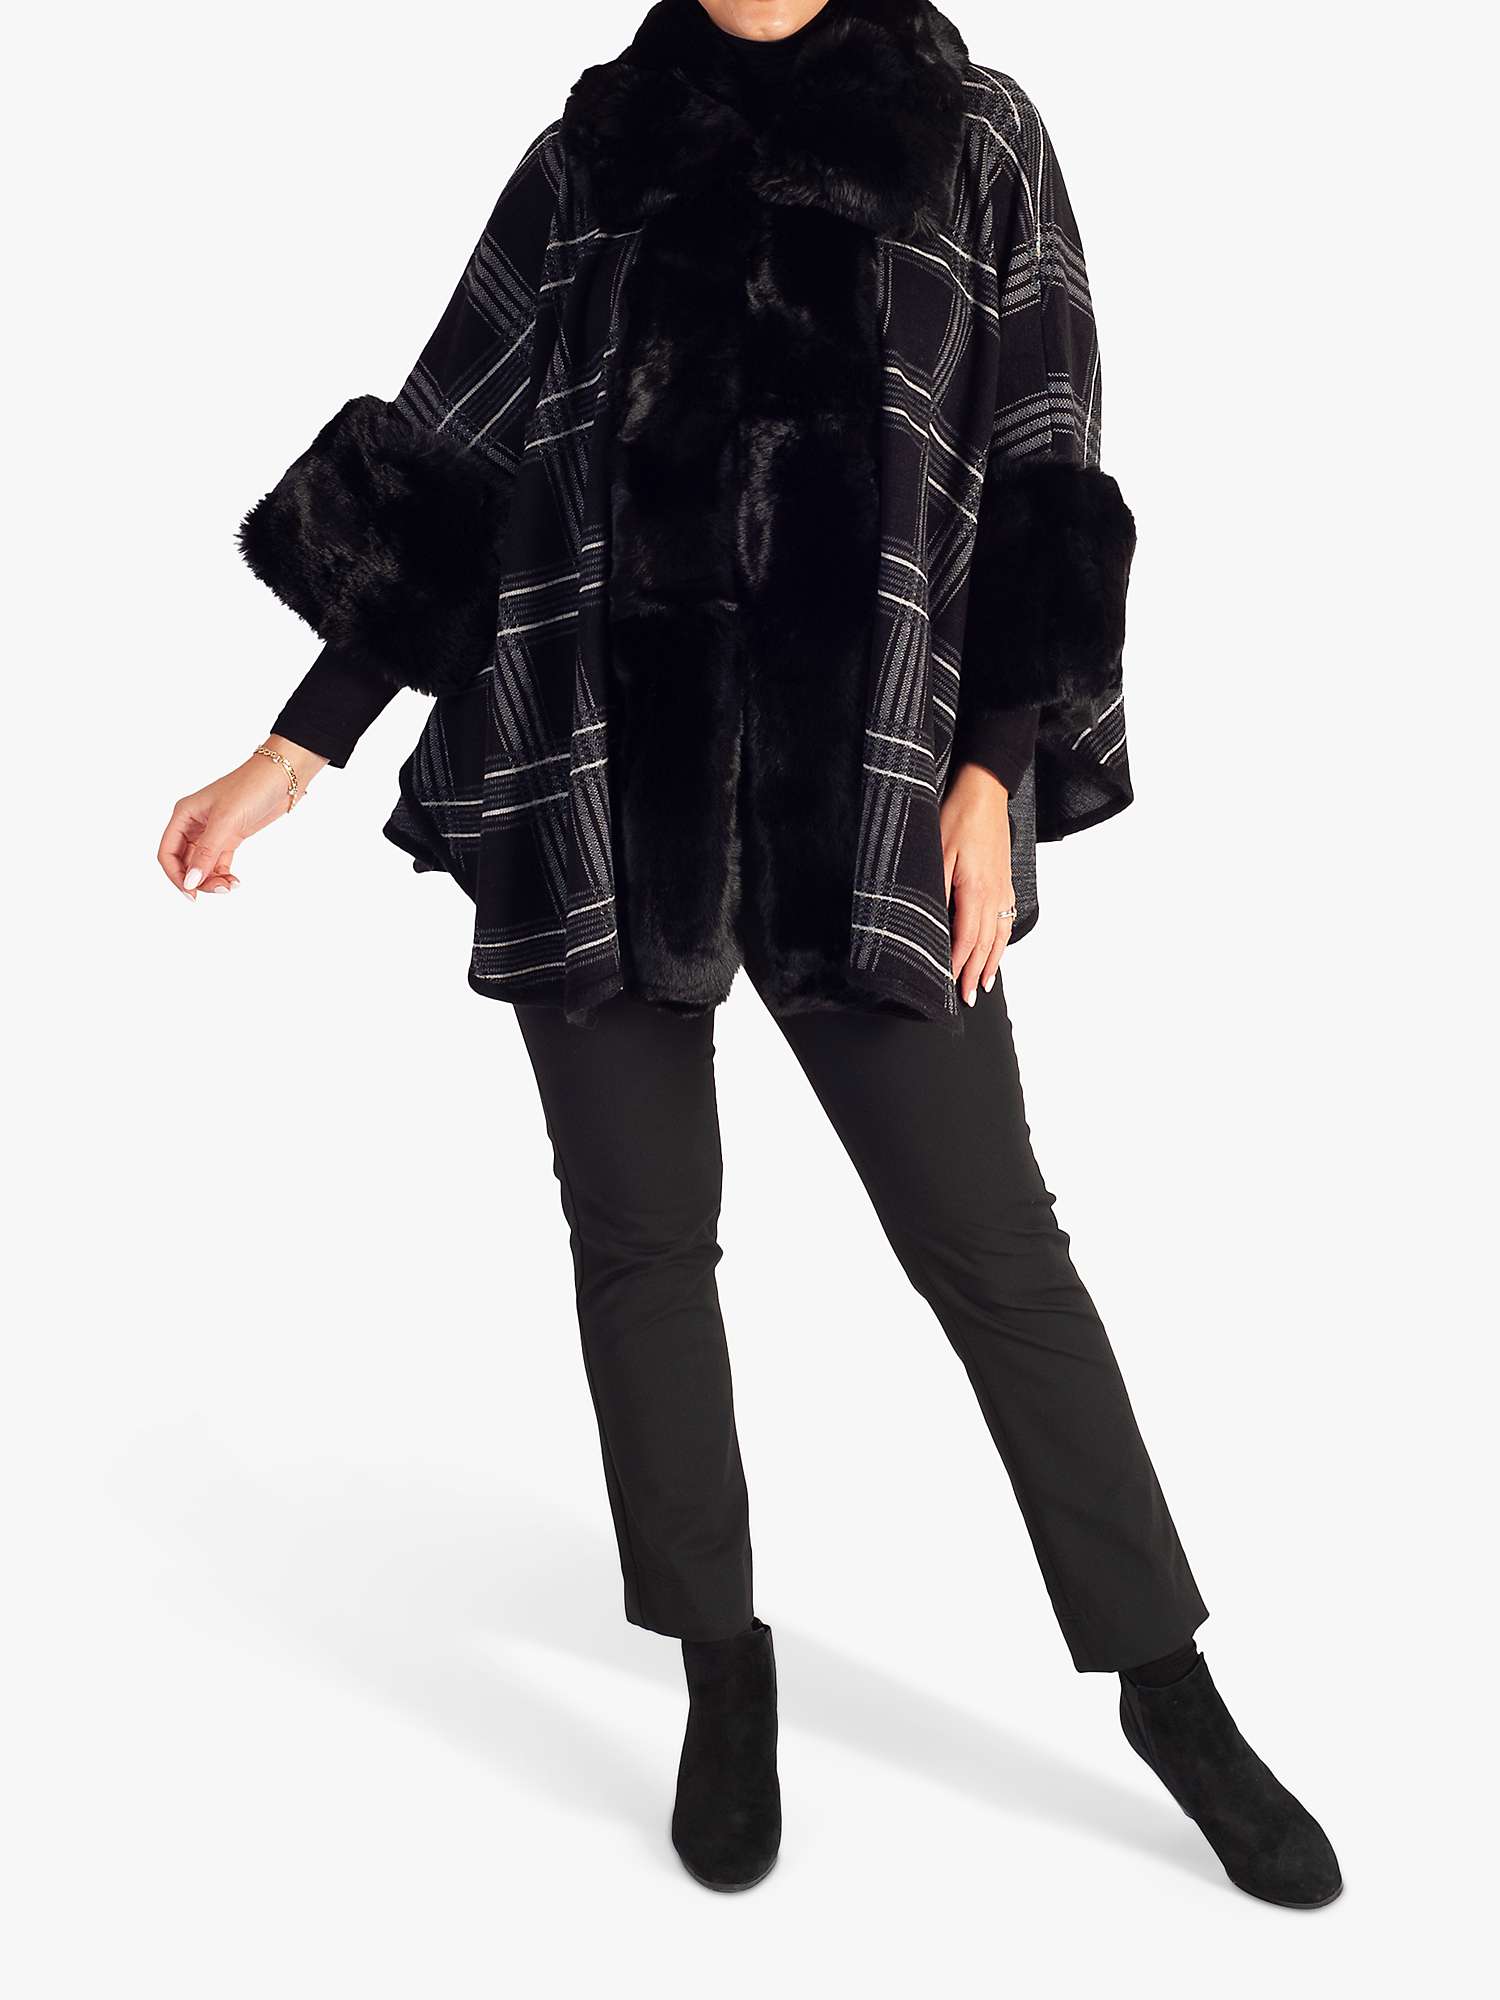 Buy chesca Check Wrap with Fur Trim, Black Online at johnlewis.com